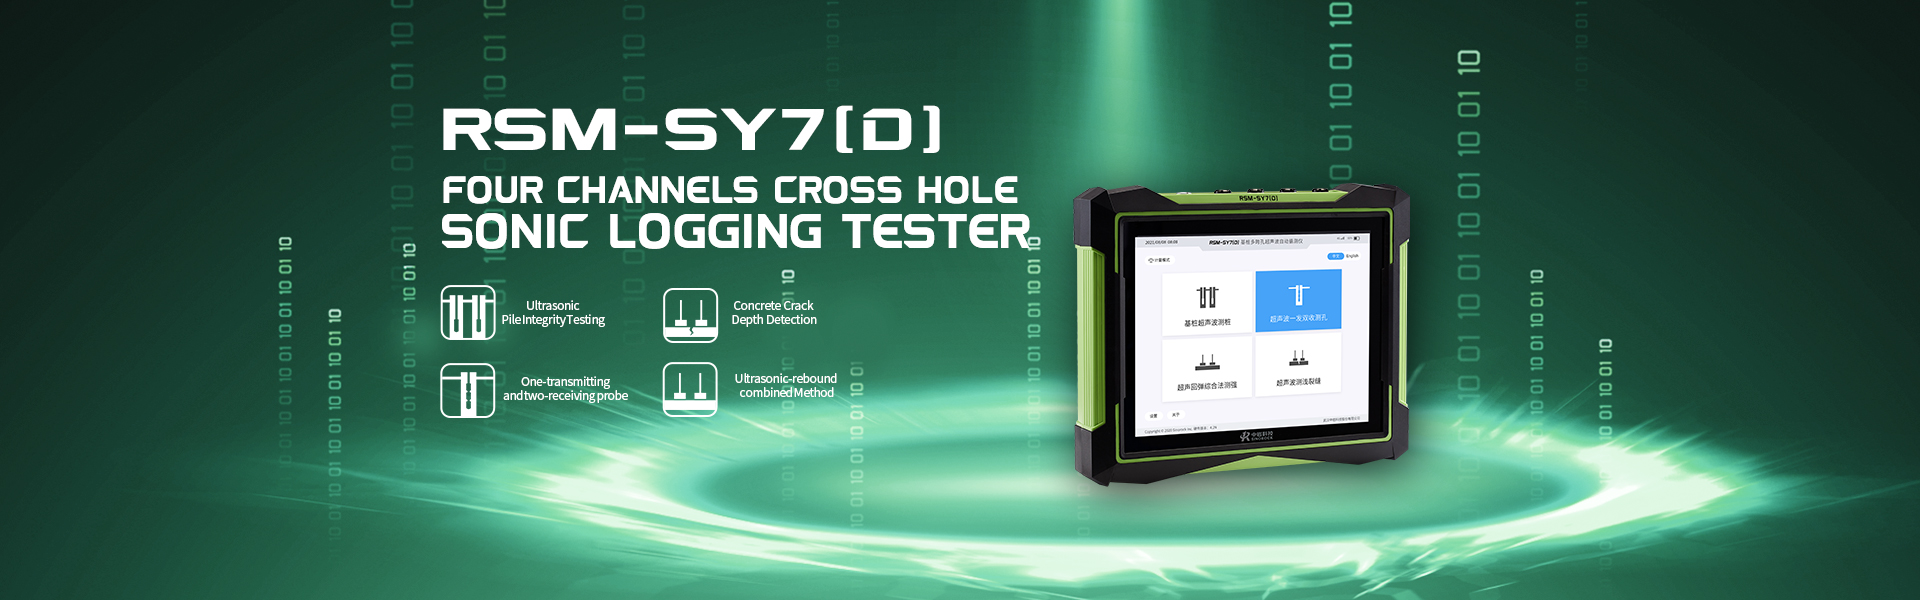 RSM-SY7(D) Four channels Cross Hole Sonic Logging Tester